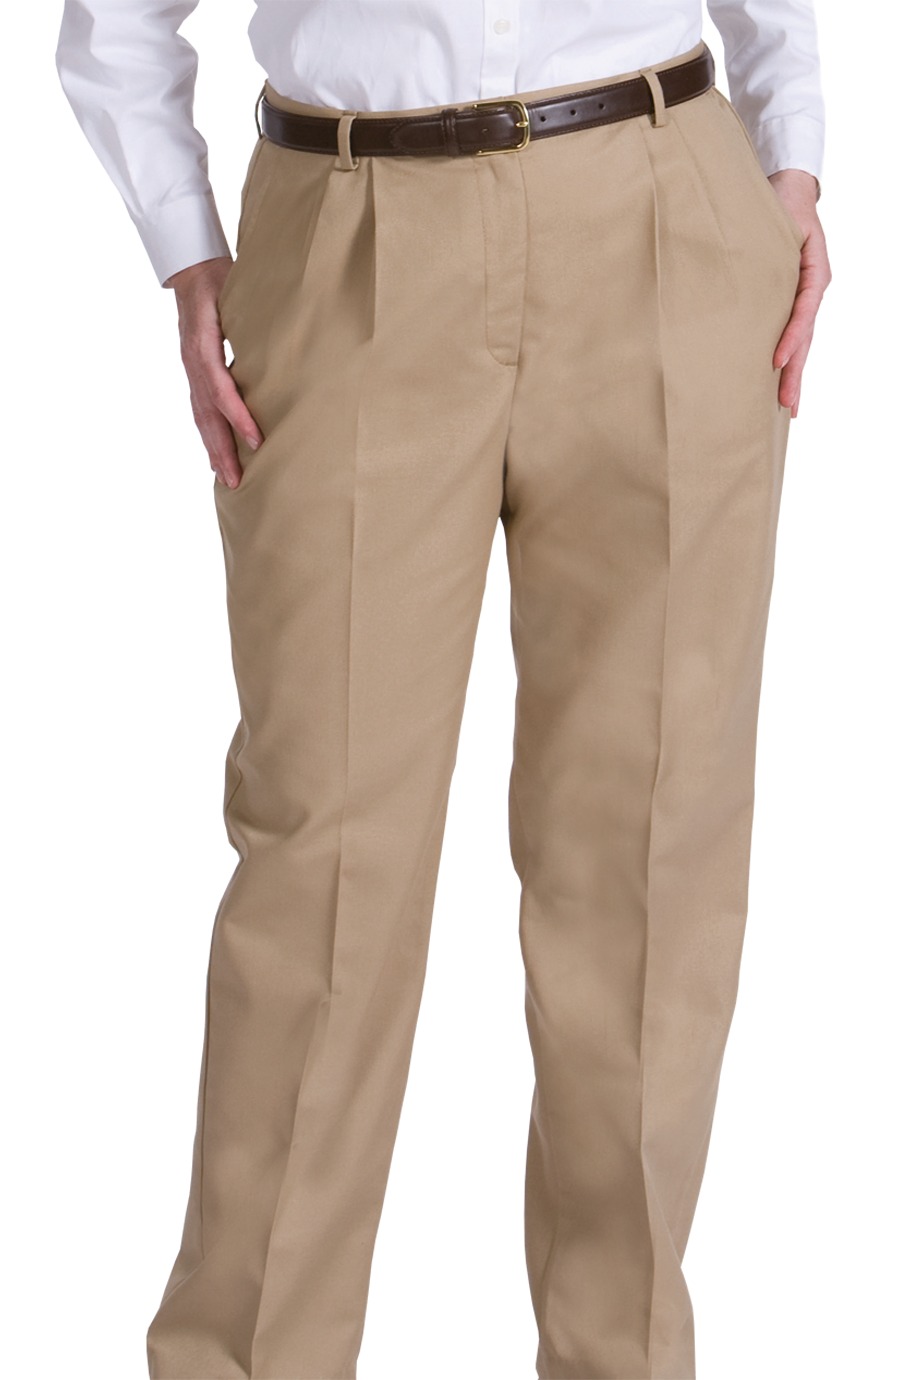 Edwards Garment 8619 - Women's Business Casual Pleated Pant